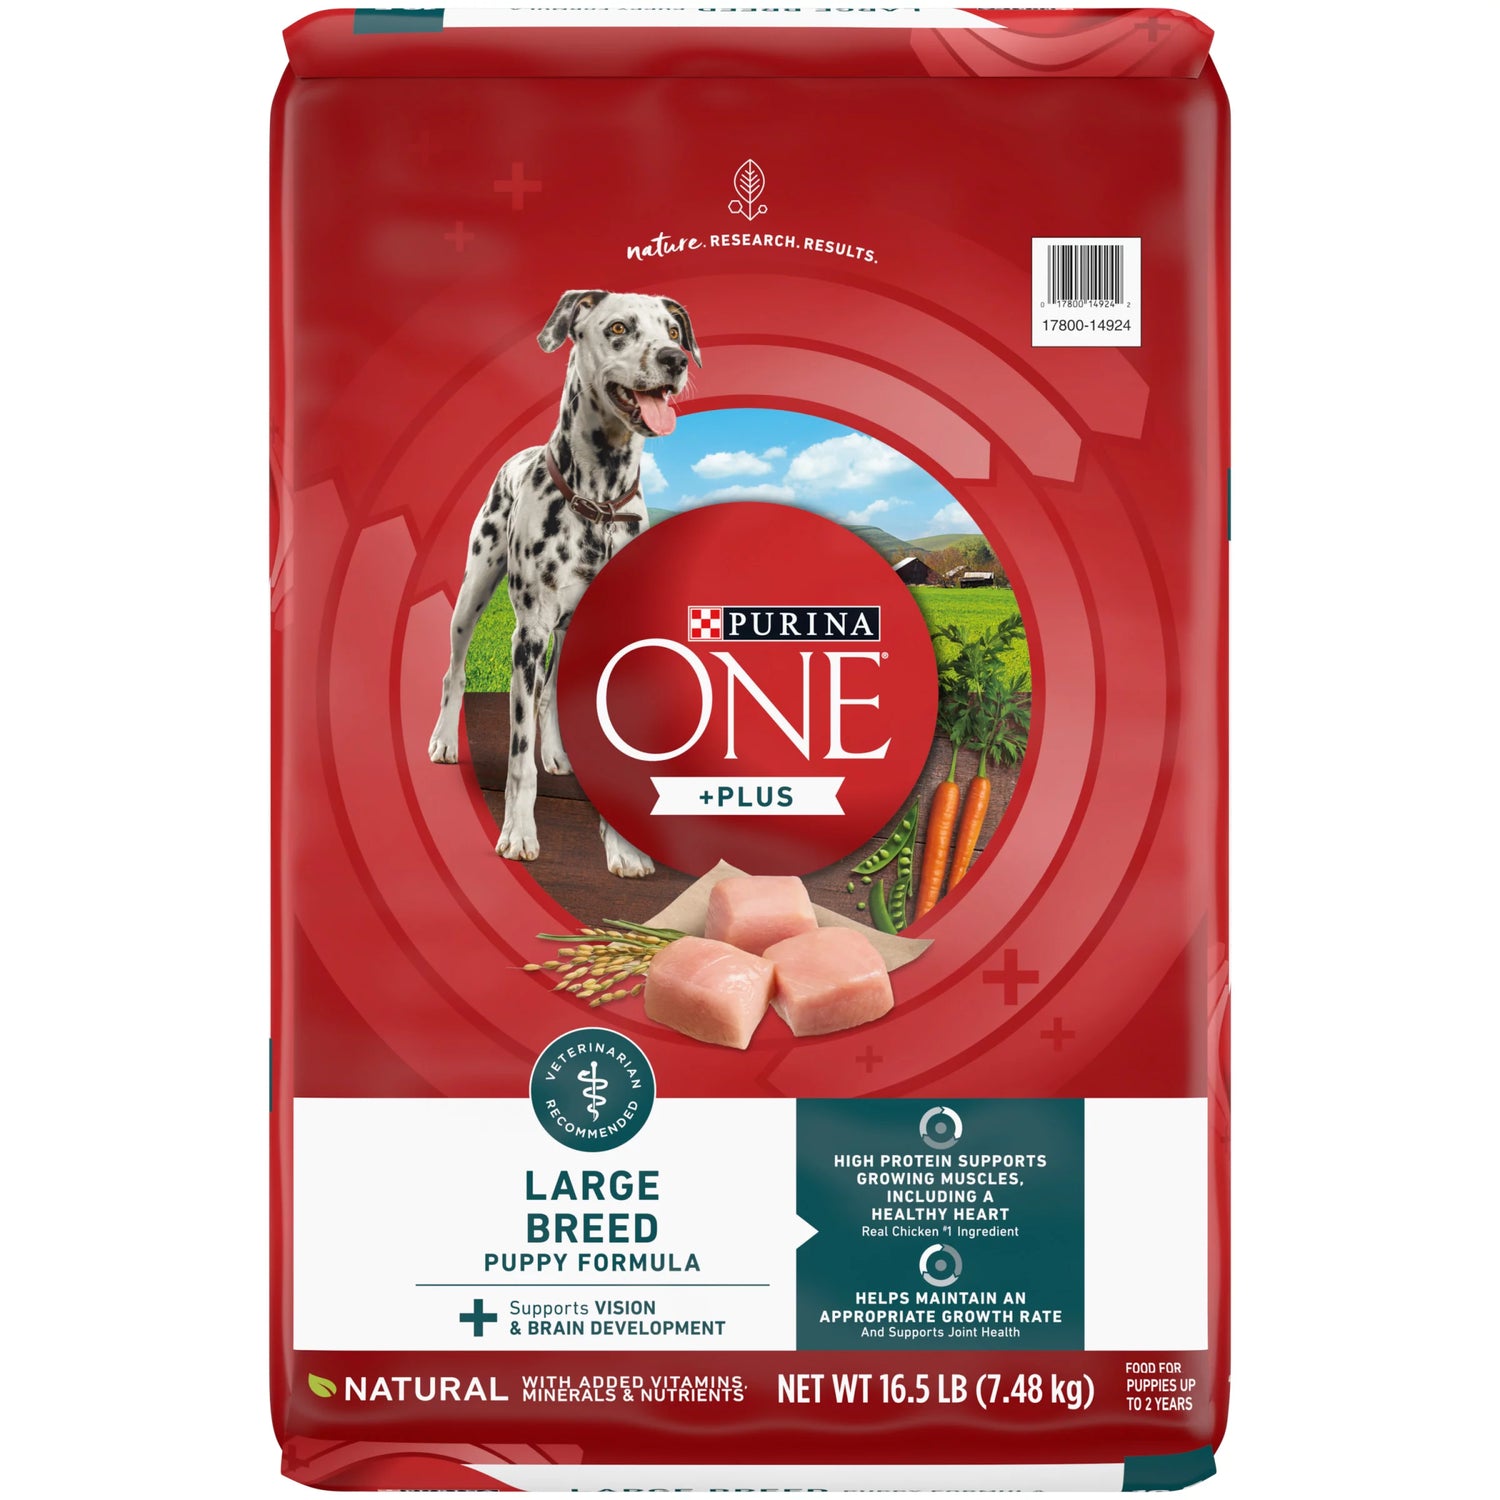 Purina ONE Natural, High Protein, Large Breed Dry Puppy Food, +Plus Large Breed Formula, 16.5 Lb. Bag